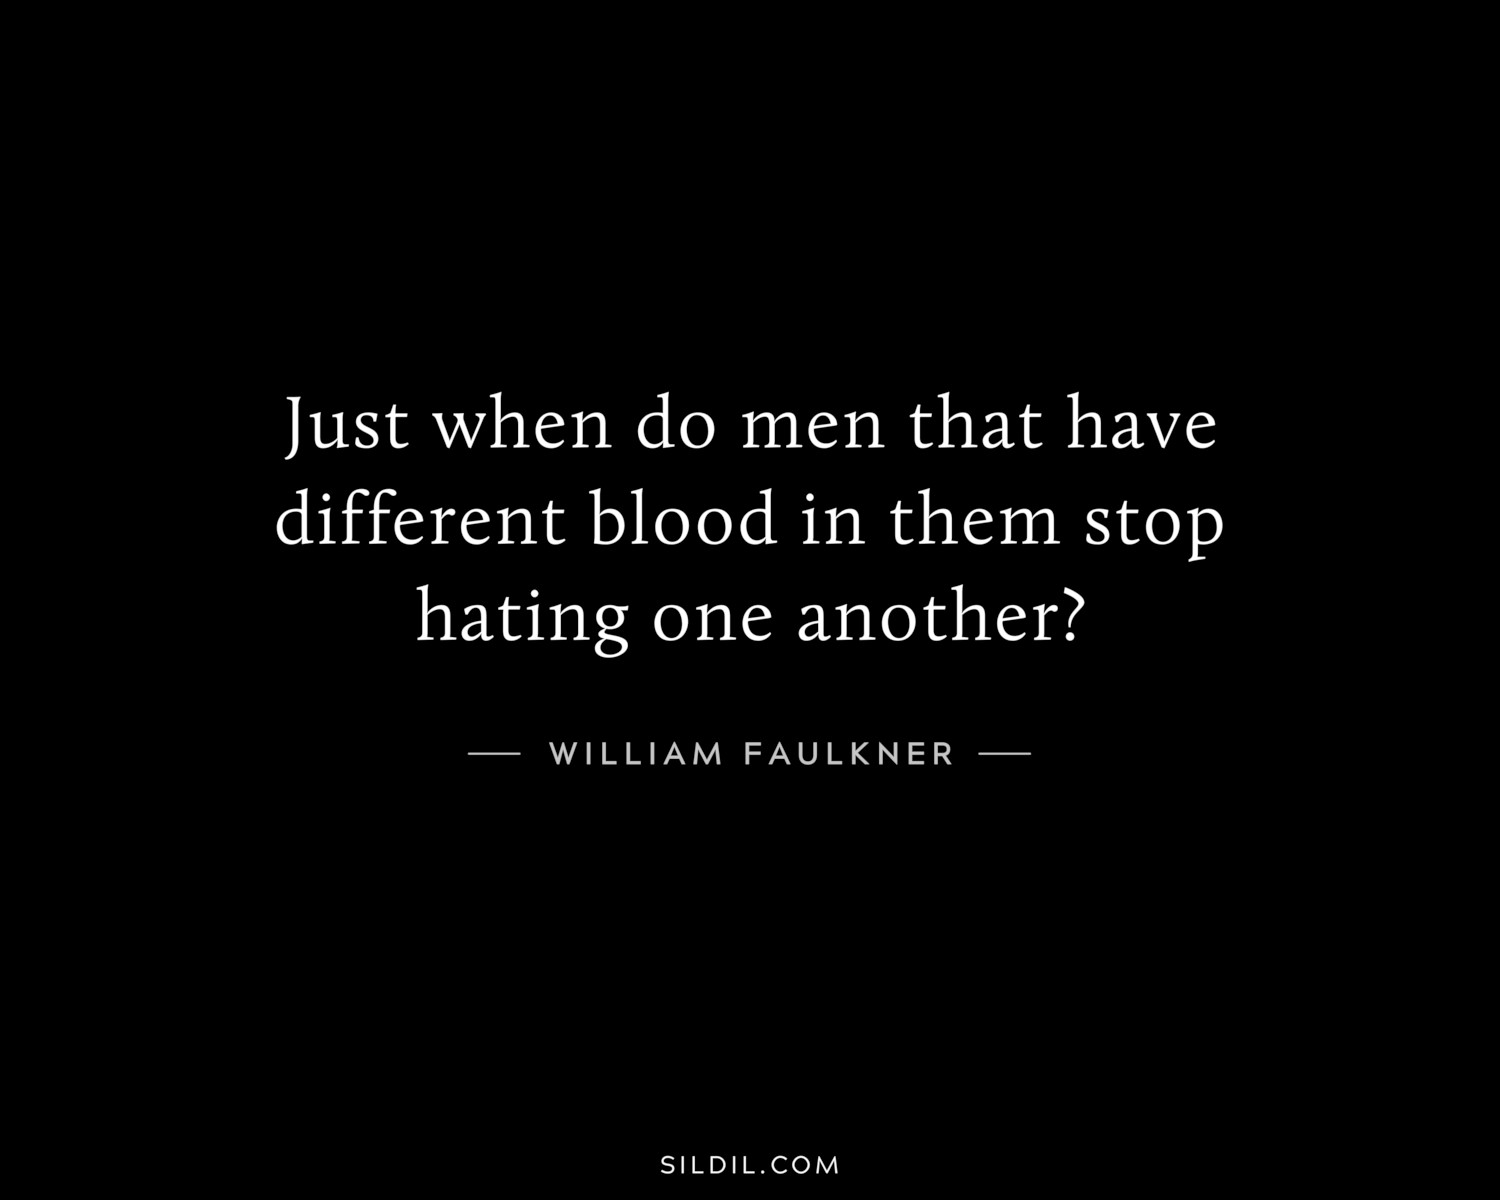 Just when do men that have different blood in them stop hating one another?